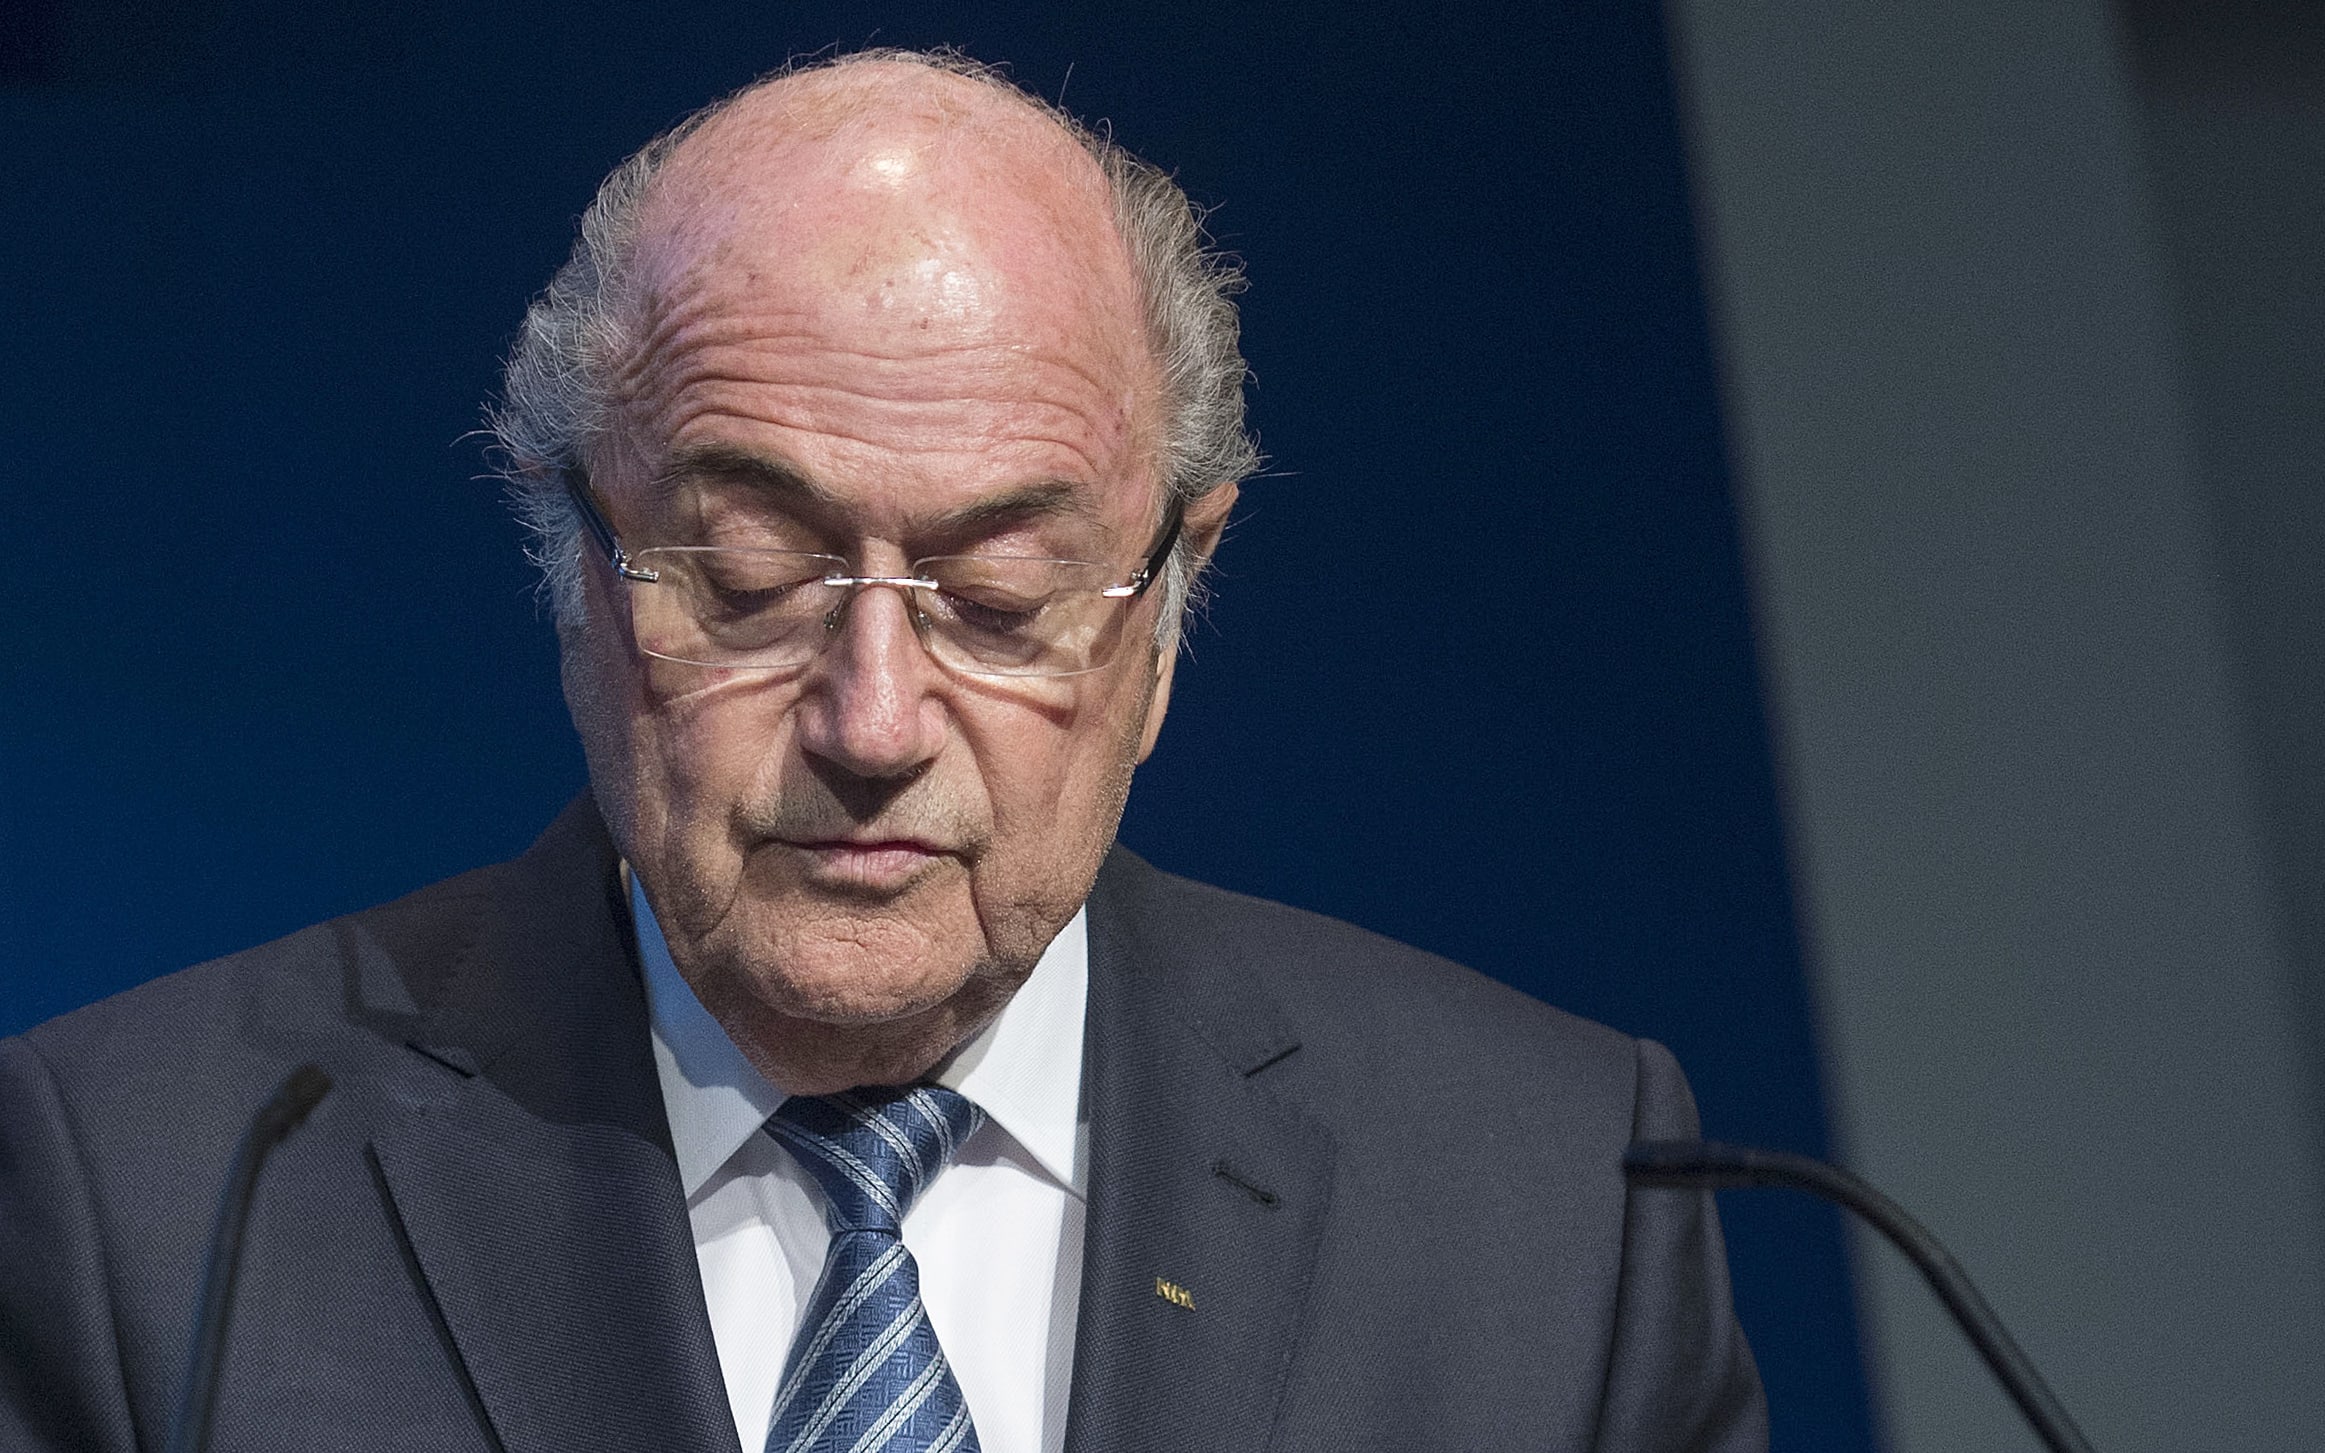 Sepp Blatter speaks at a news conference in Zurich on 2 June 2015.